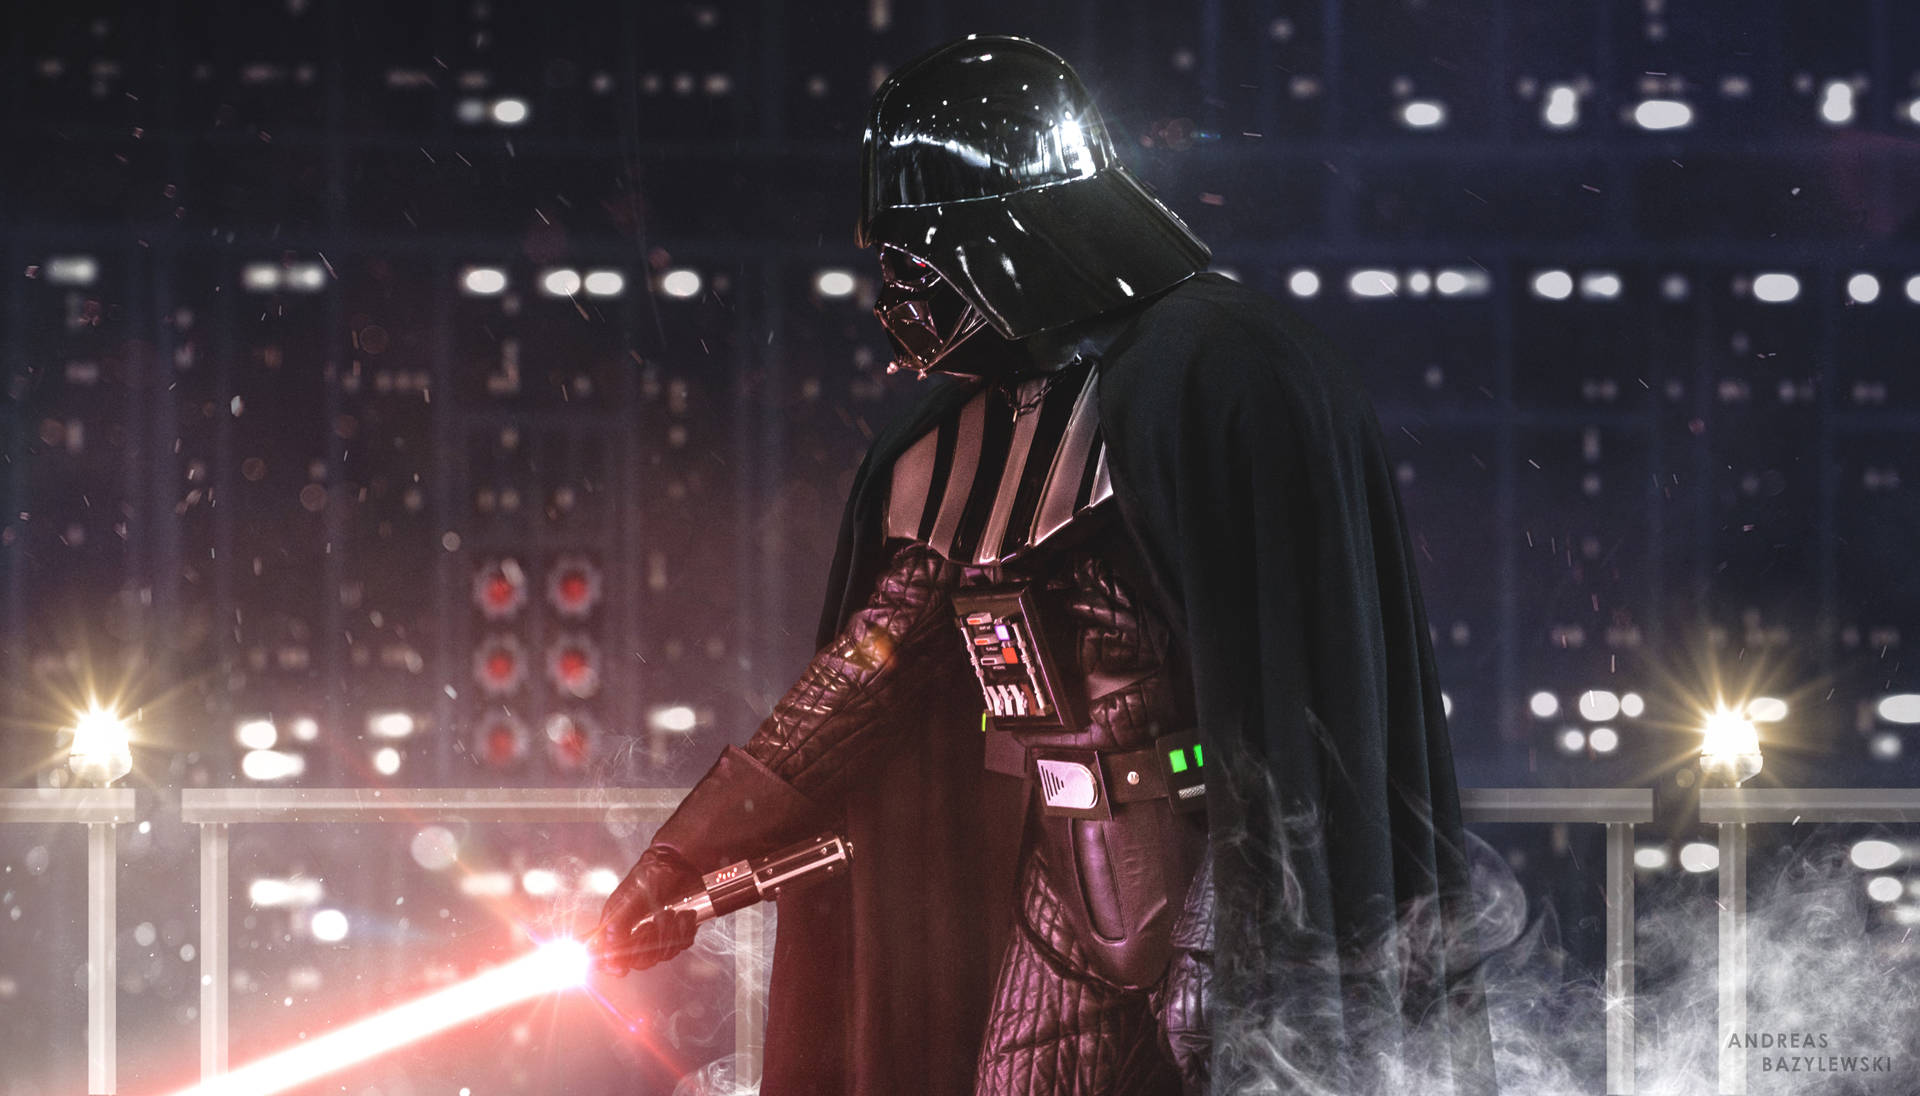 Darth Vader standing in front of a city at night with a red lightsaber - Darth Vader